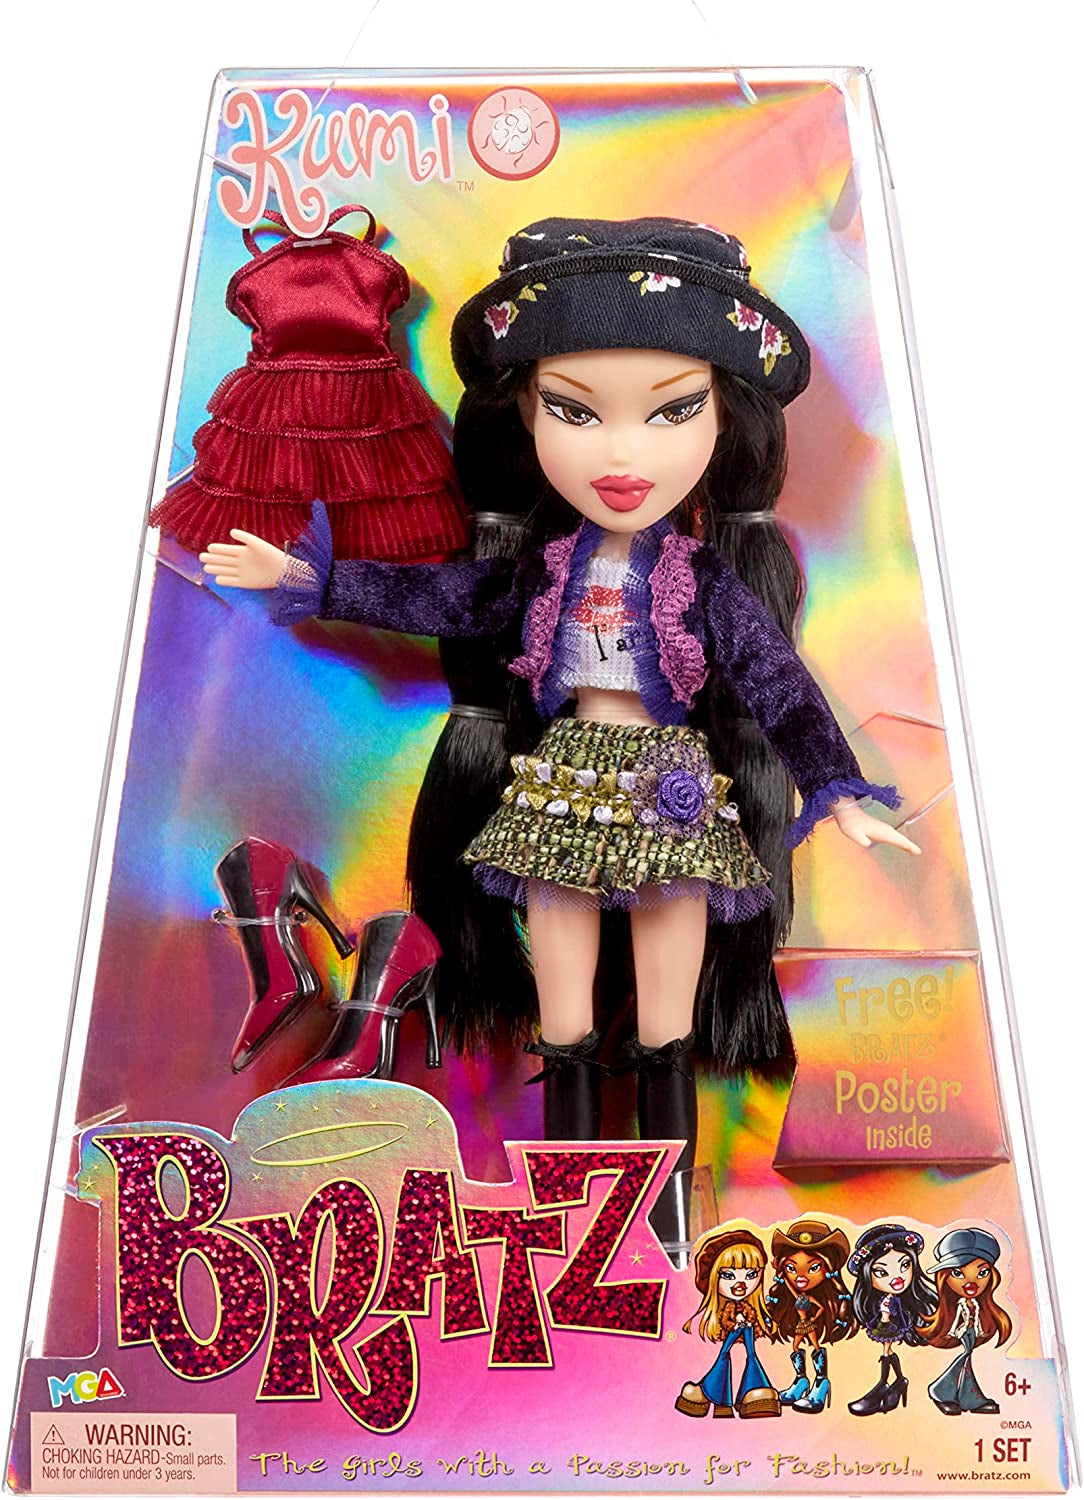 Original Fashion Doll - KUMI - Includes Two Outfits, Fashion Accessories, Special Edition Holographic Packaging & Poster - for Kids & Collectors Ages 4+